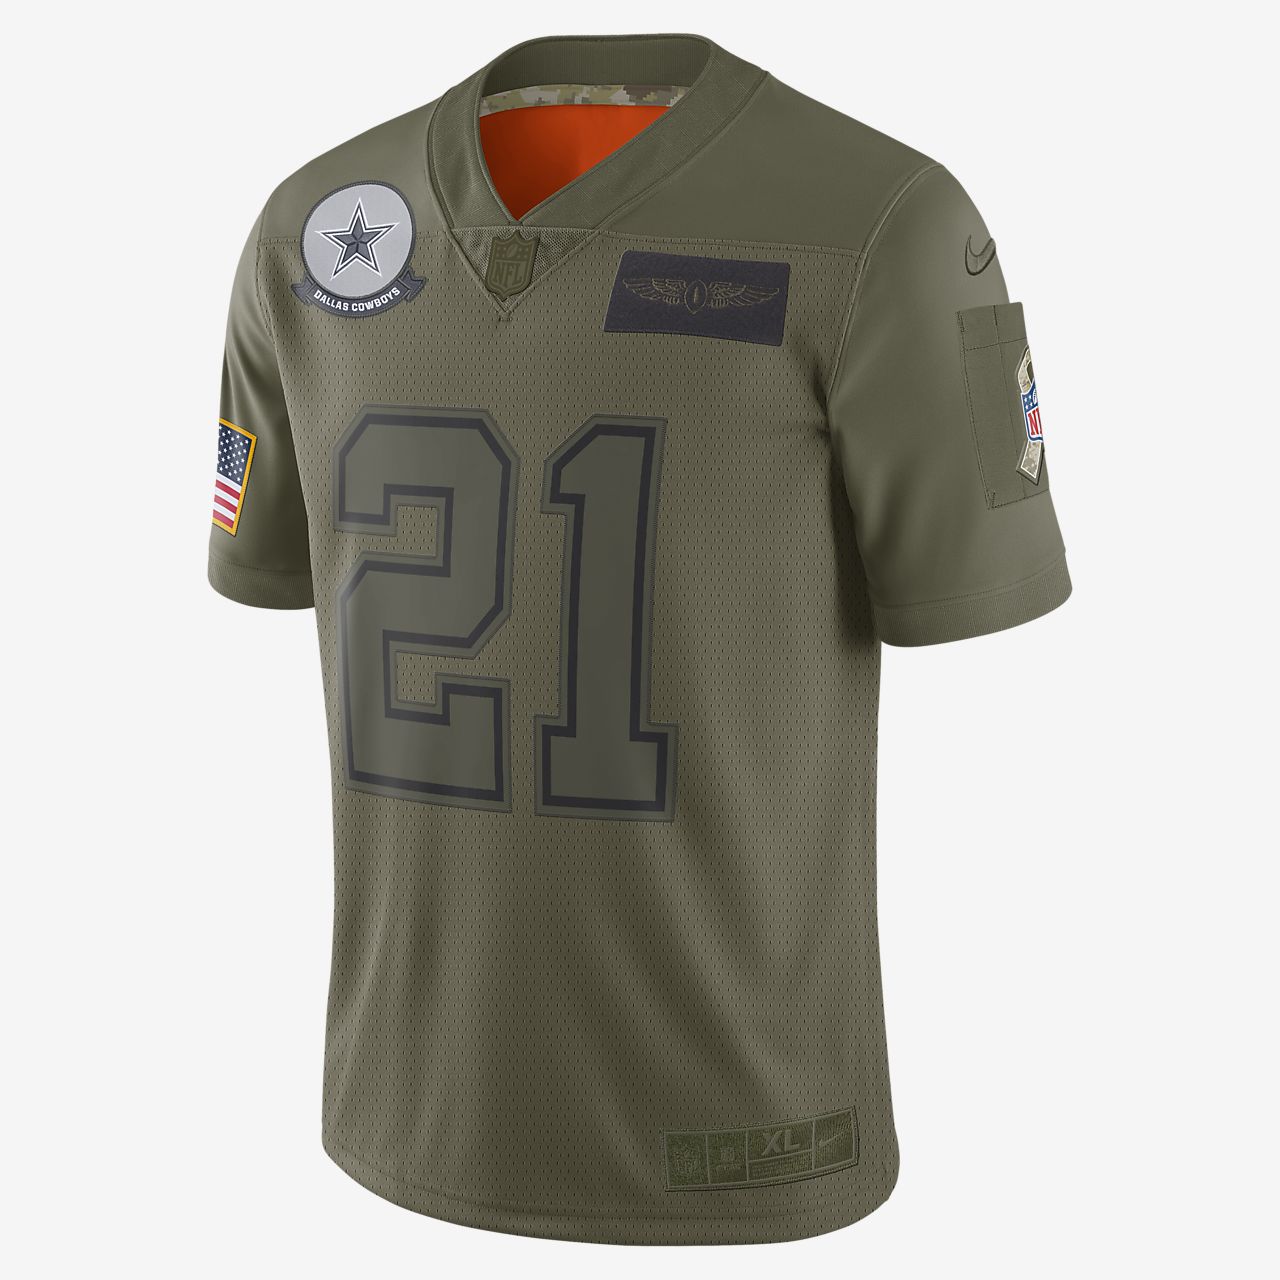 nike salute to service jersey